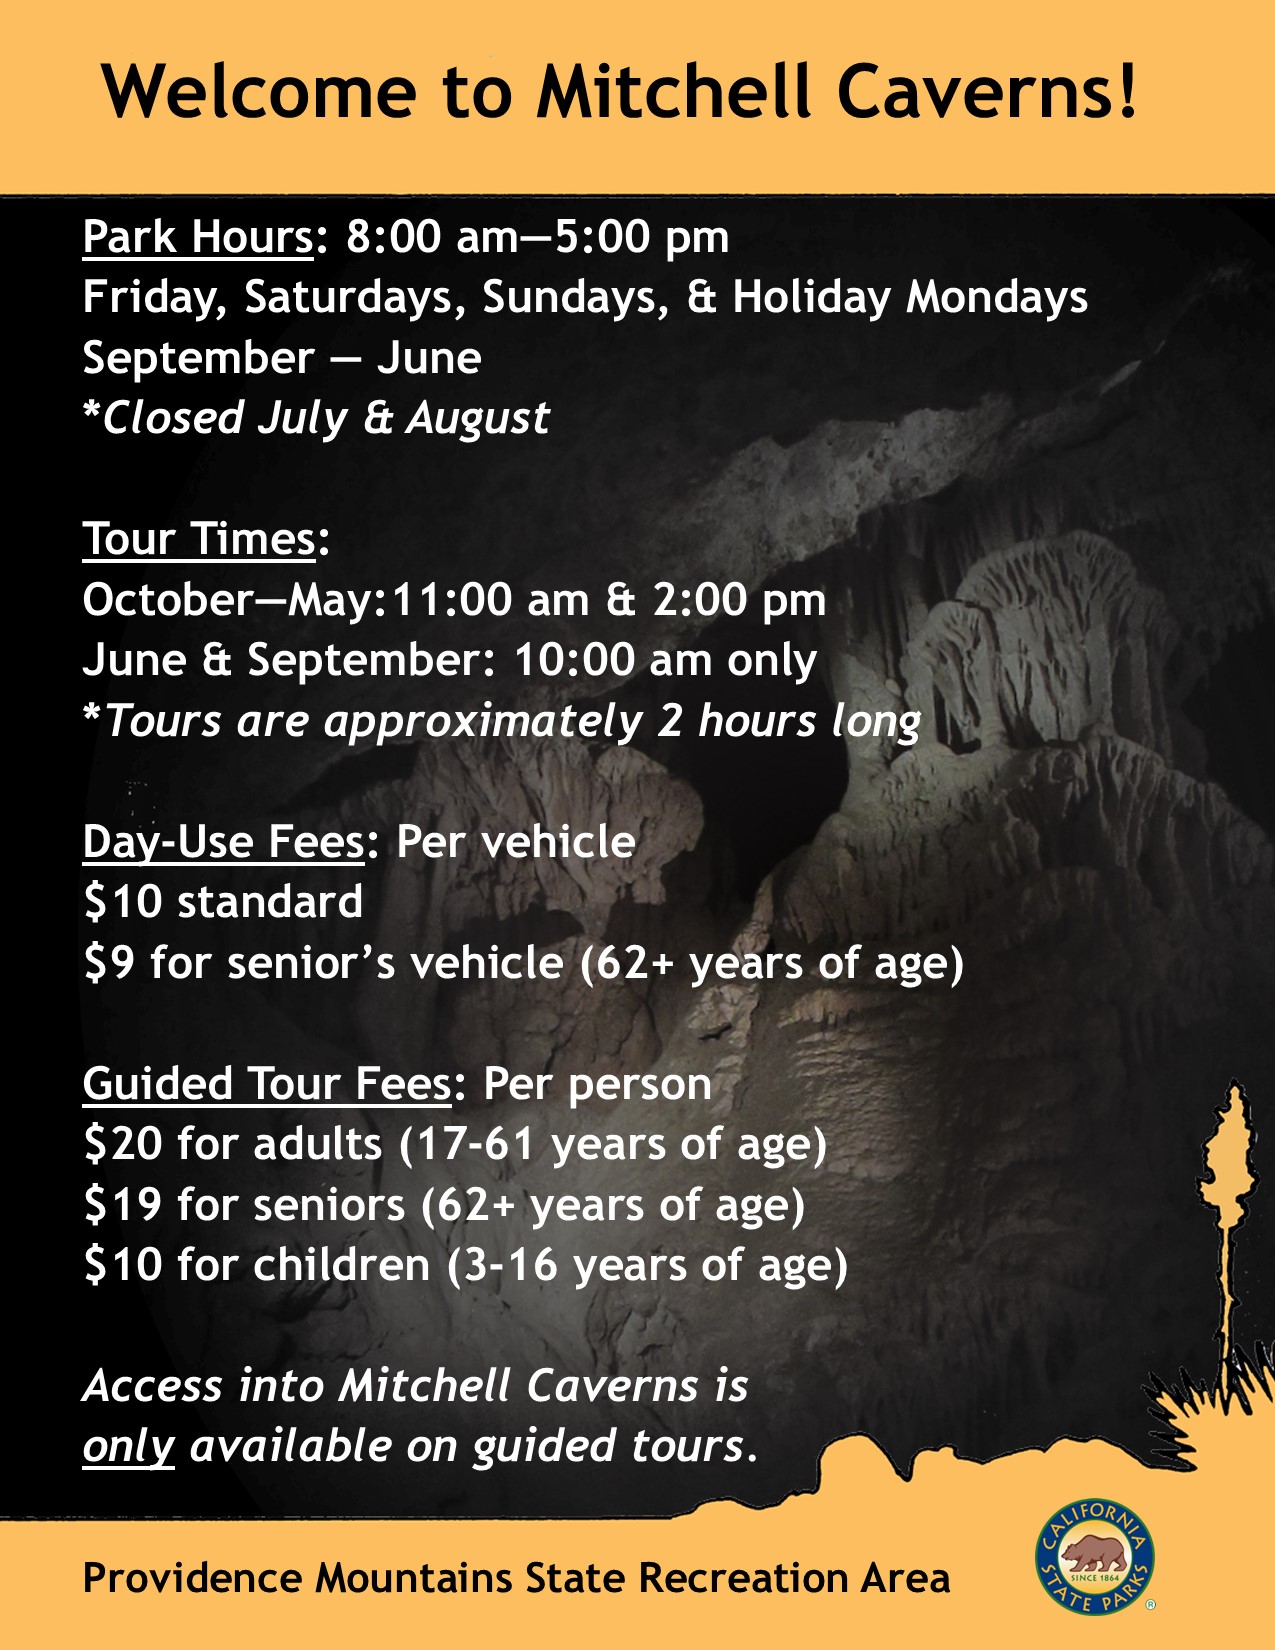 See below for Mitchell Caverns hours and fees.